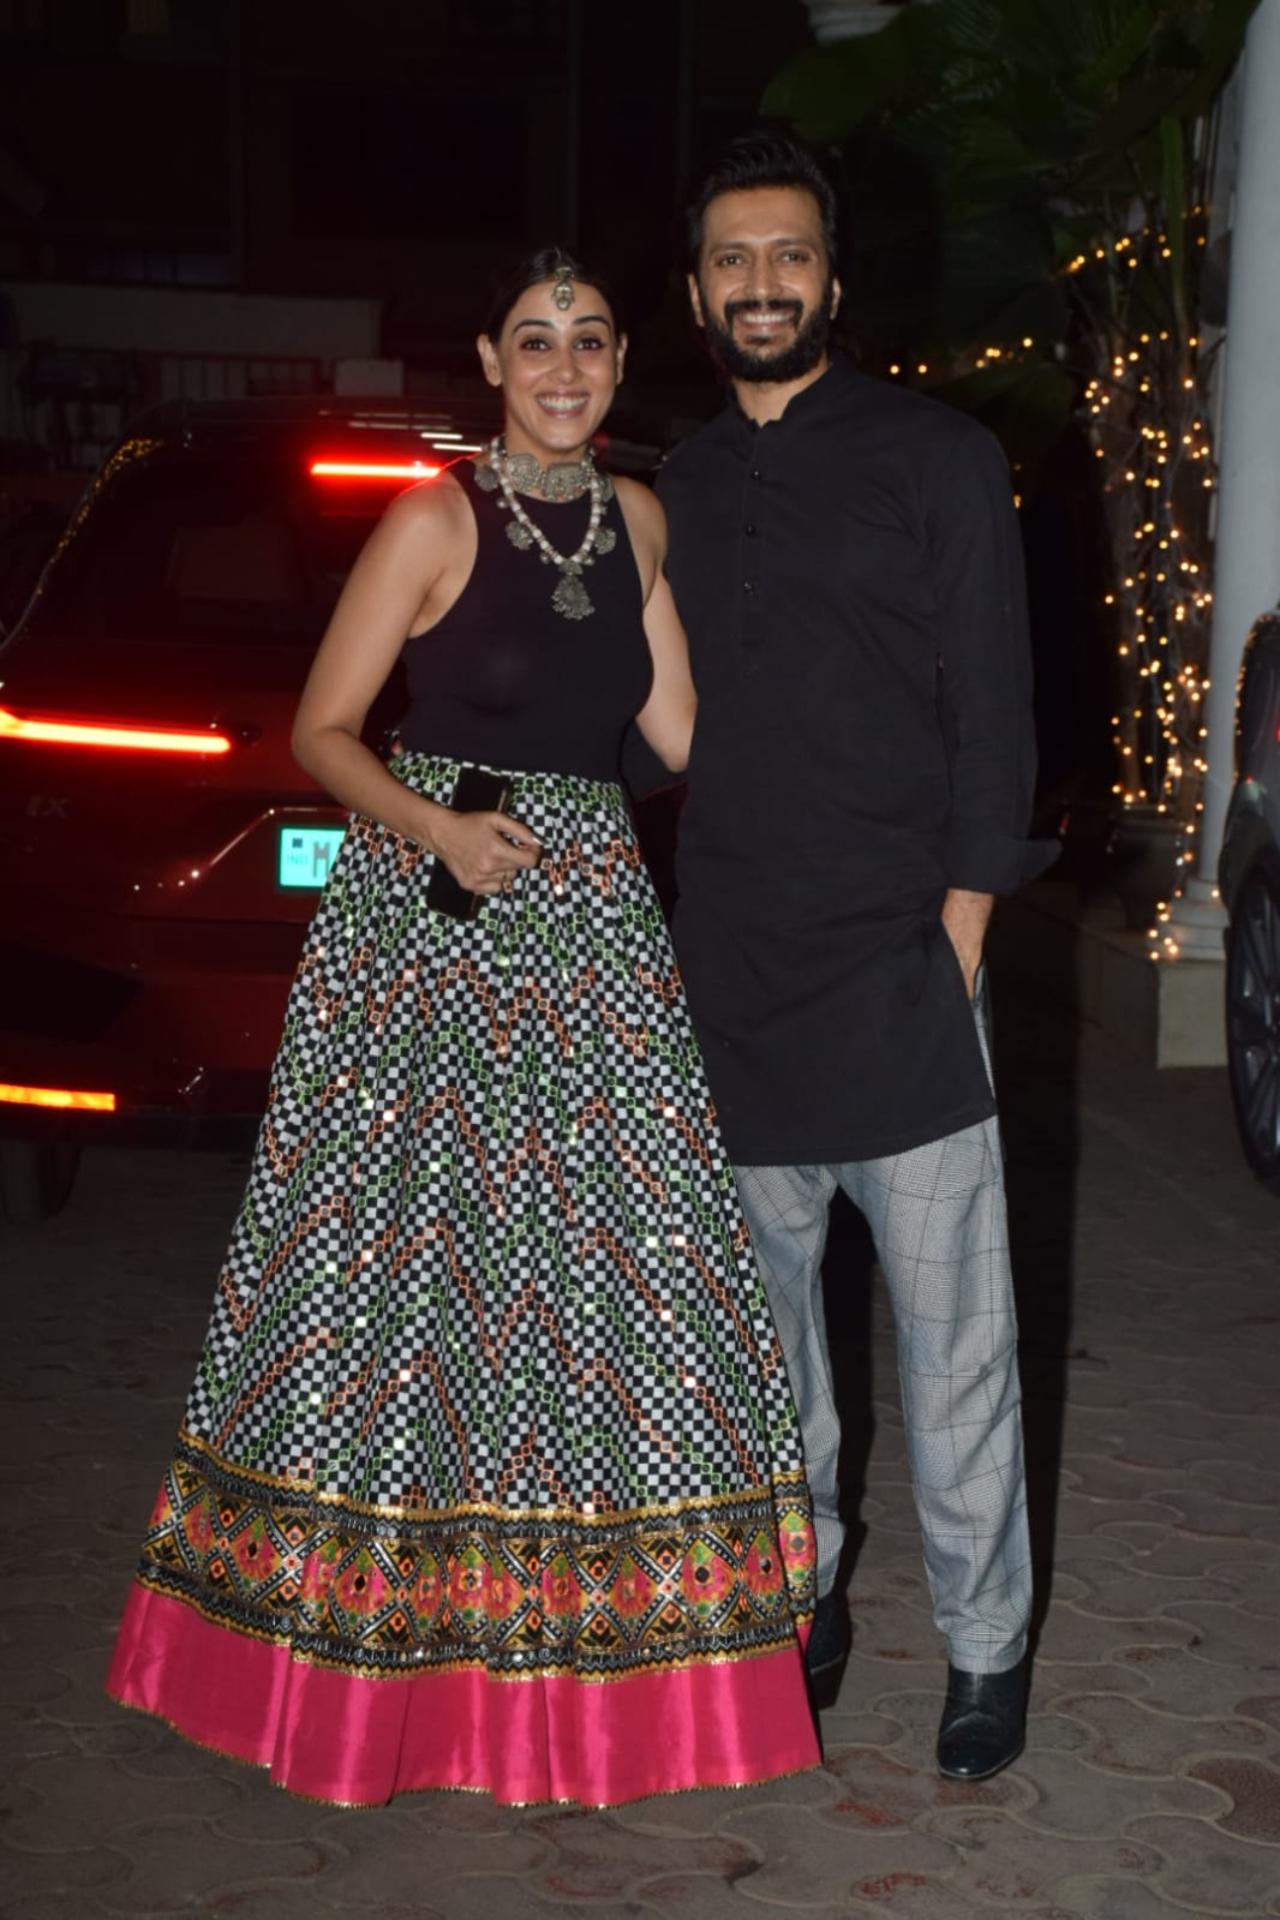 Riteish and Genelia Deshmukh have been seen around every Diwali party in the past week. The happy couple were seen twinning in black for Shilpa's party and were all smiles while posing for the paps